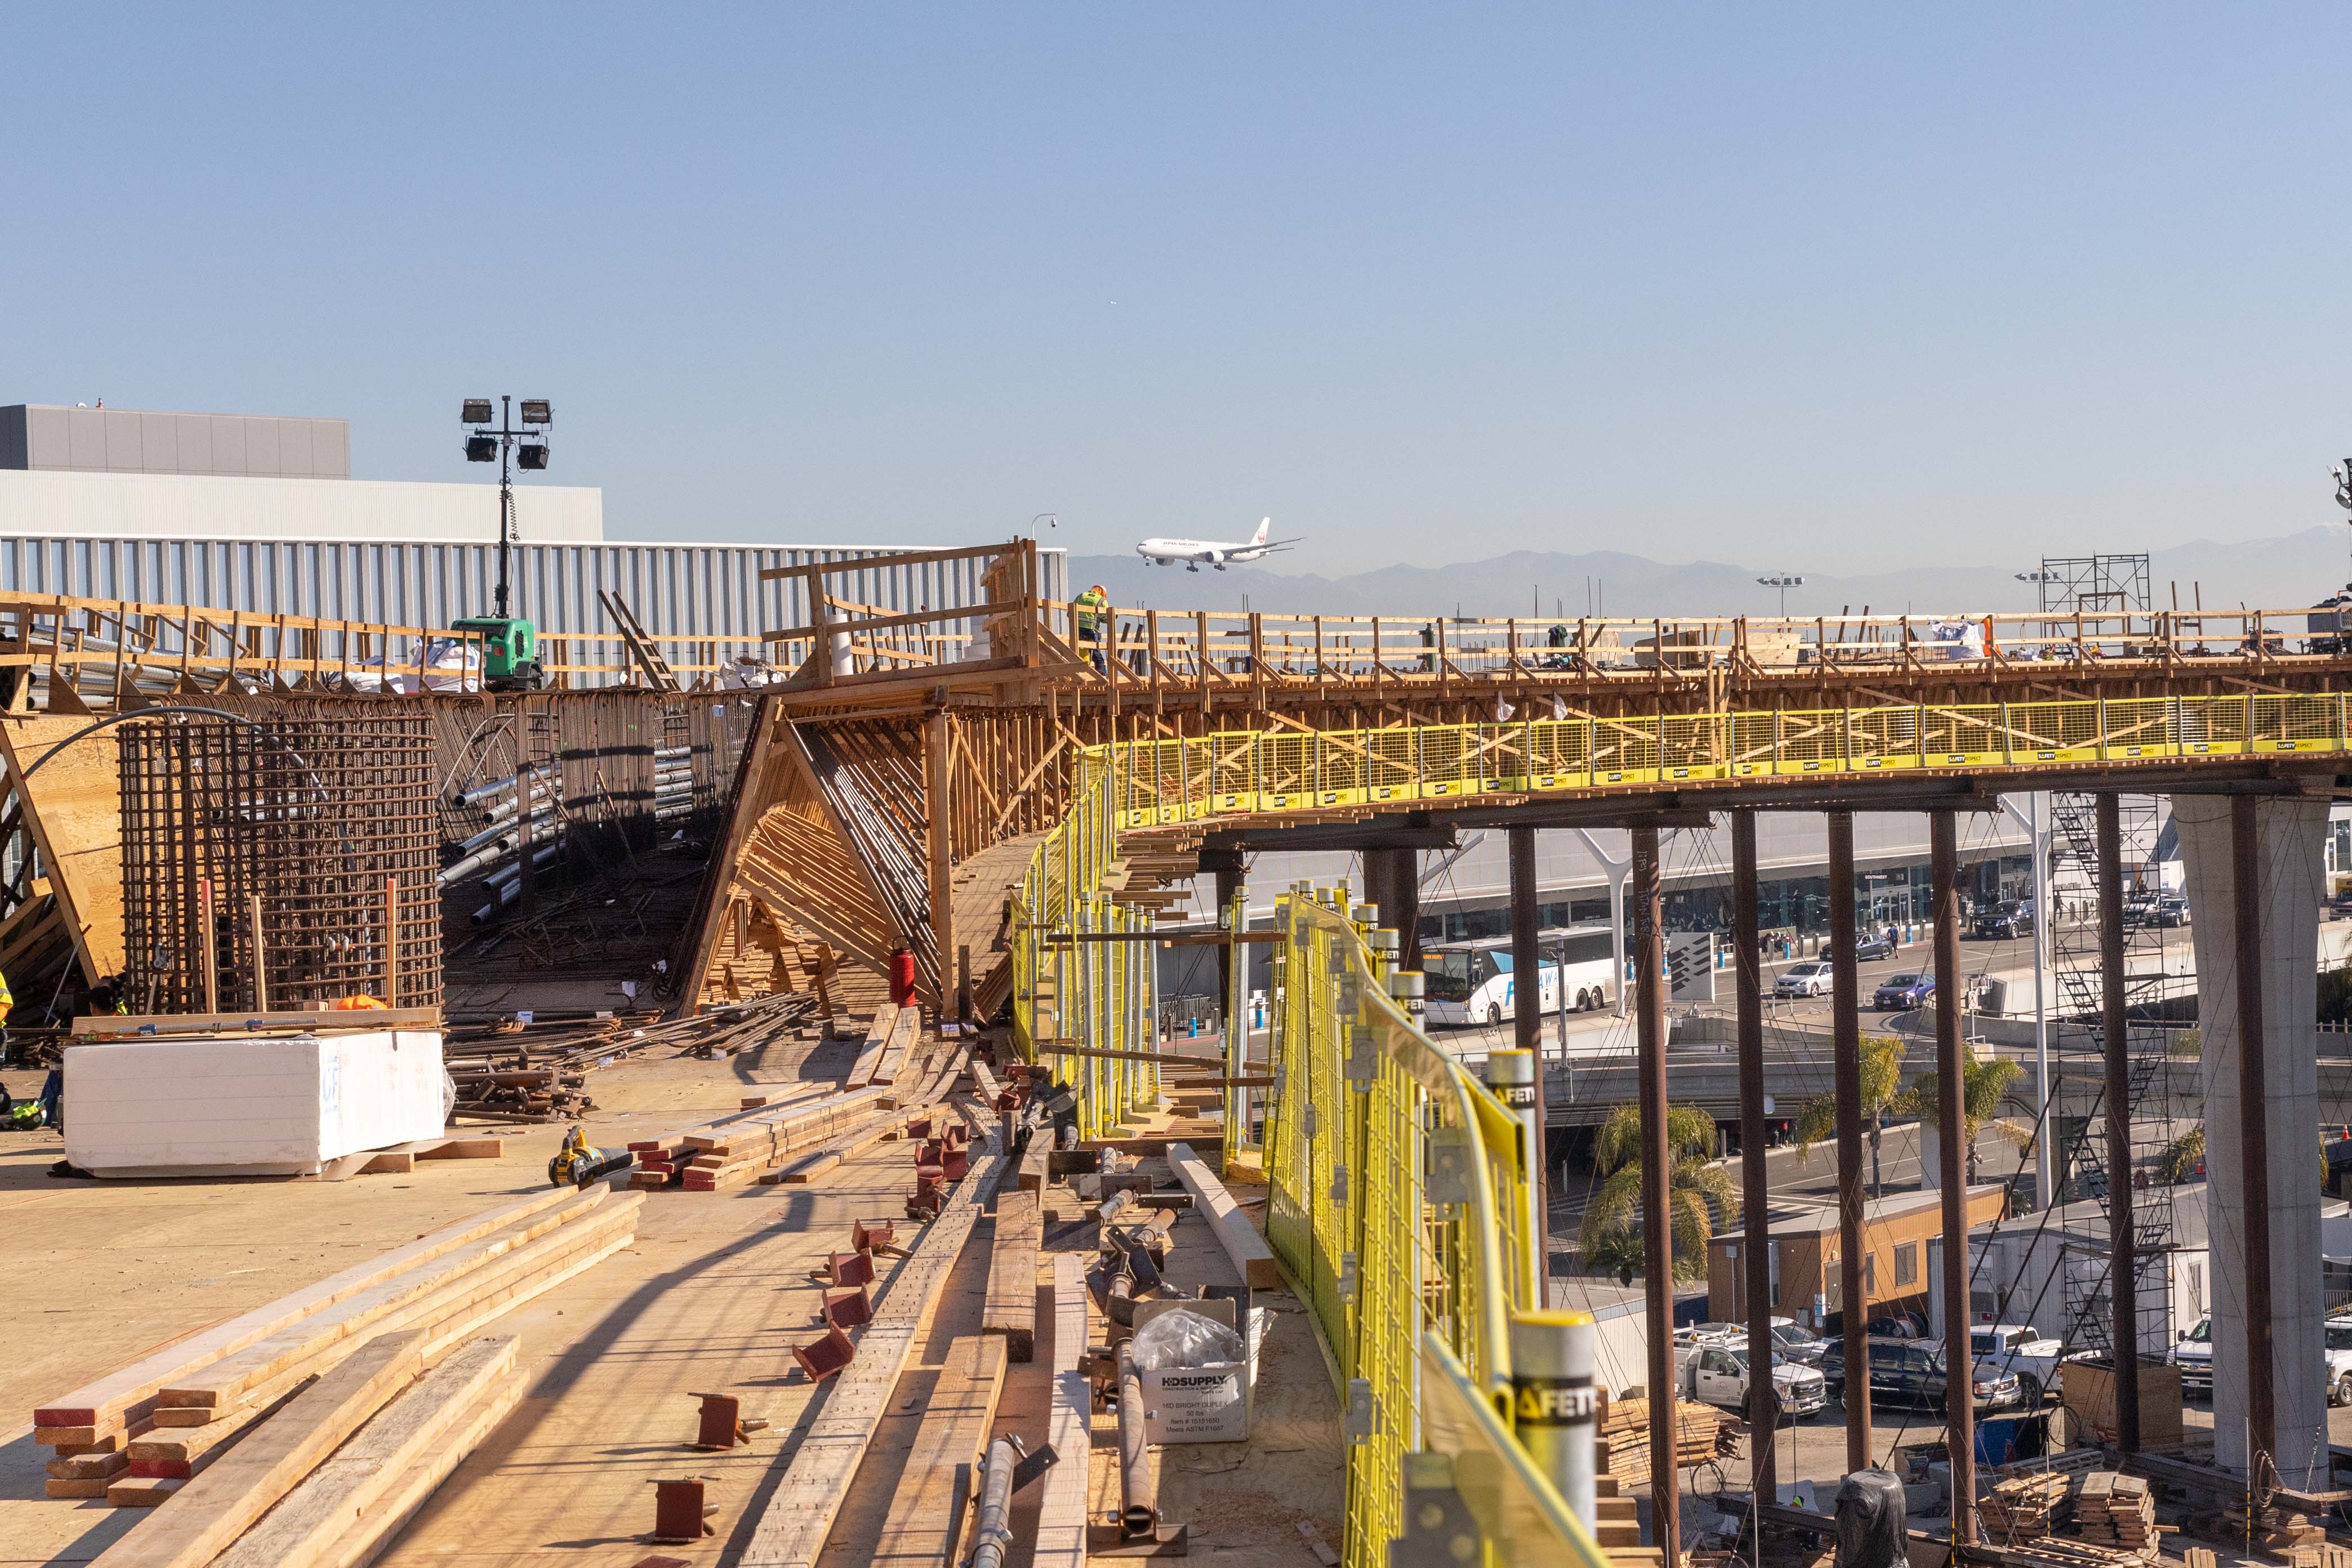 Guideway construction advances within the Central Terminal Area, providing a glimpse of LAX's elevated future.